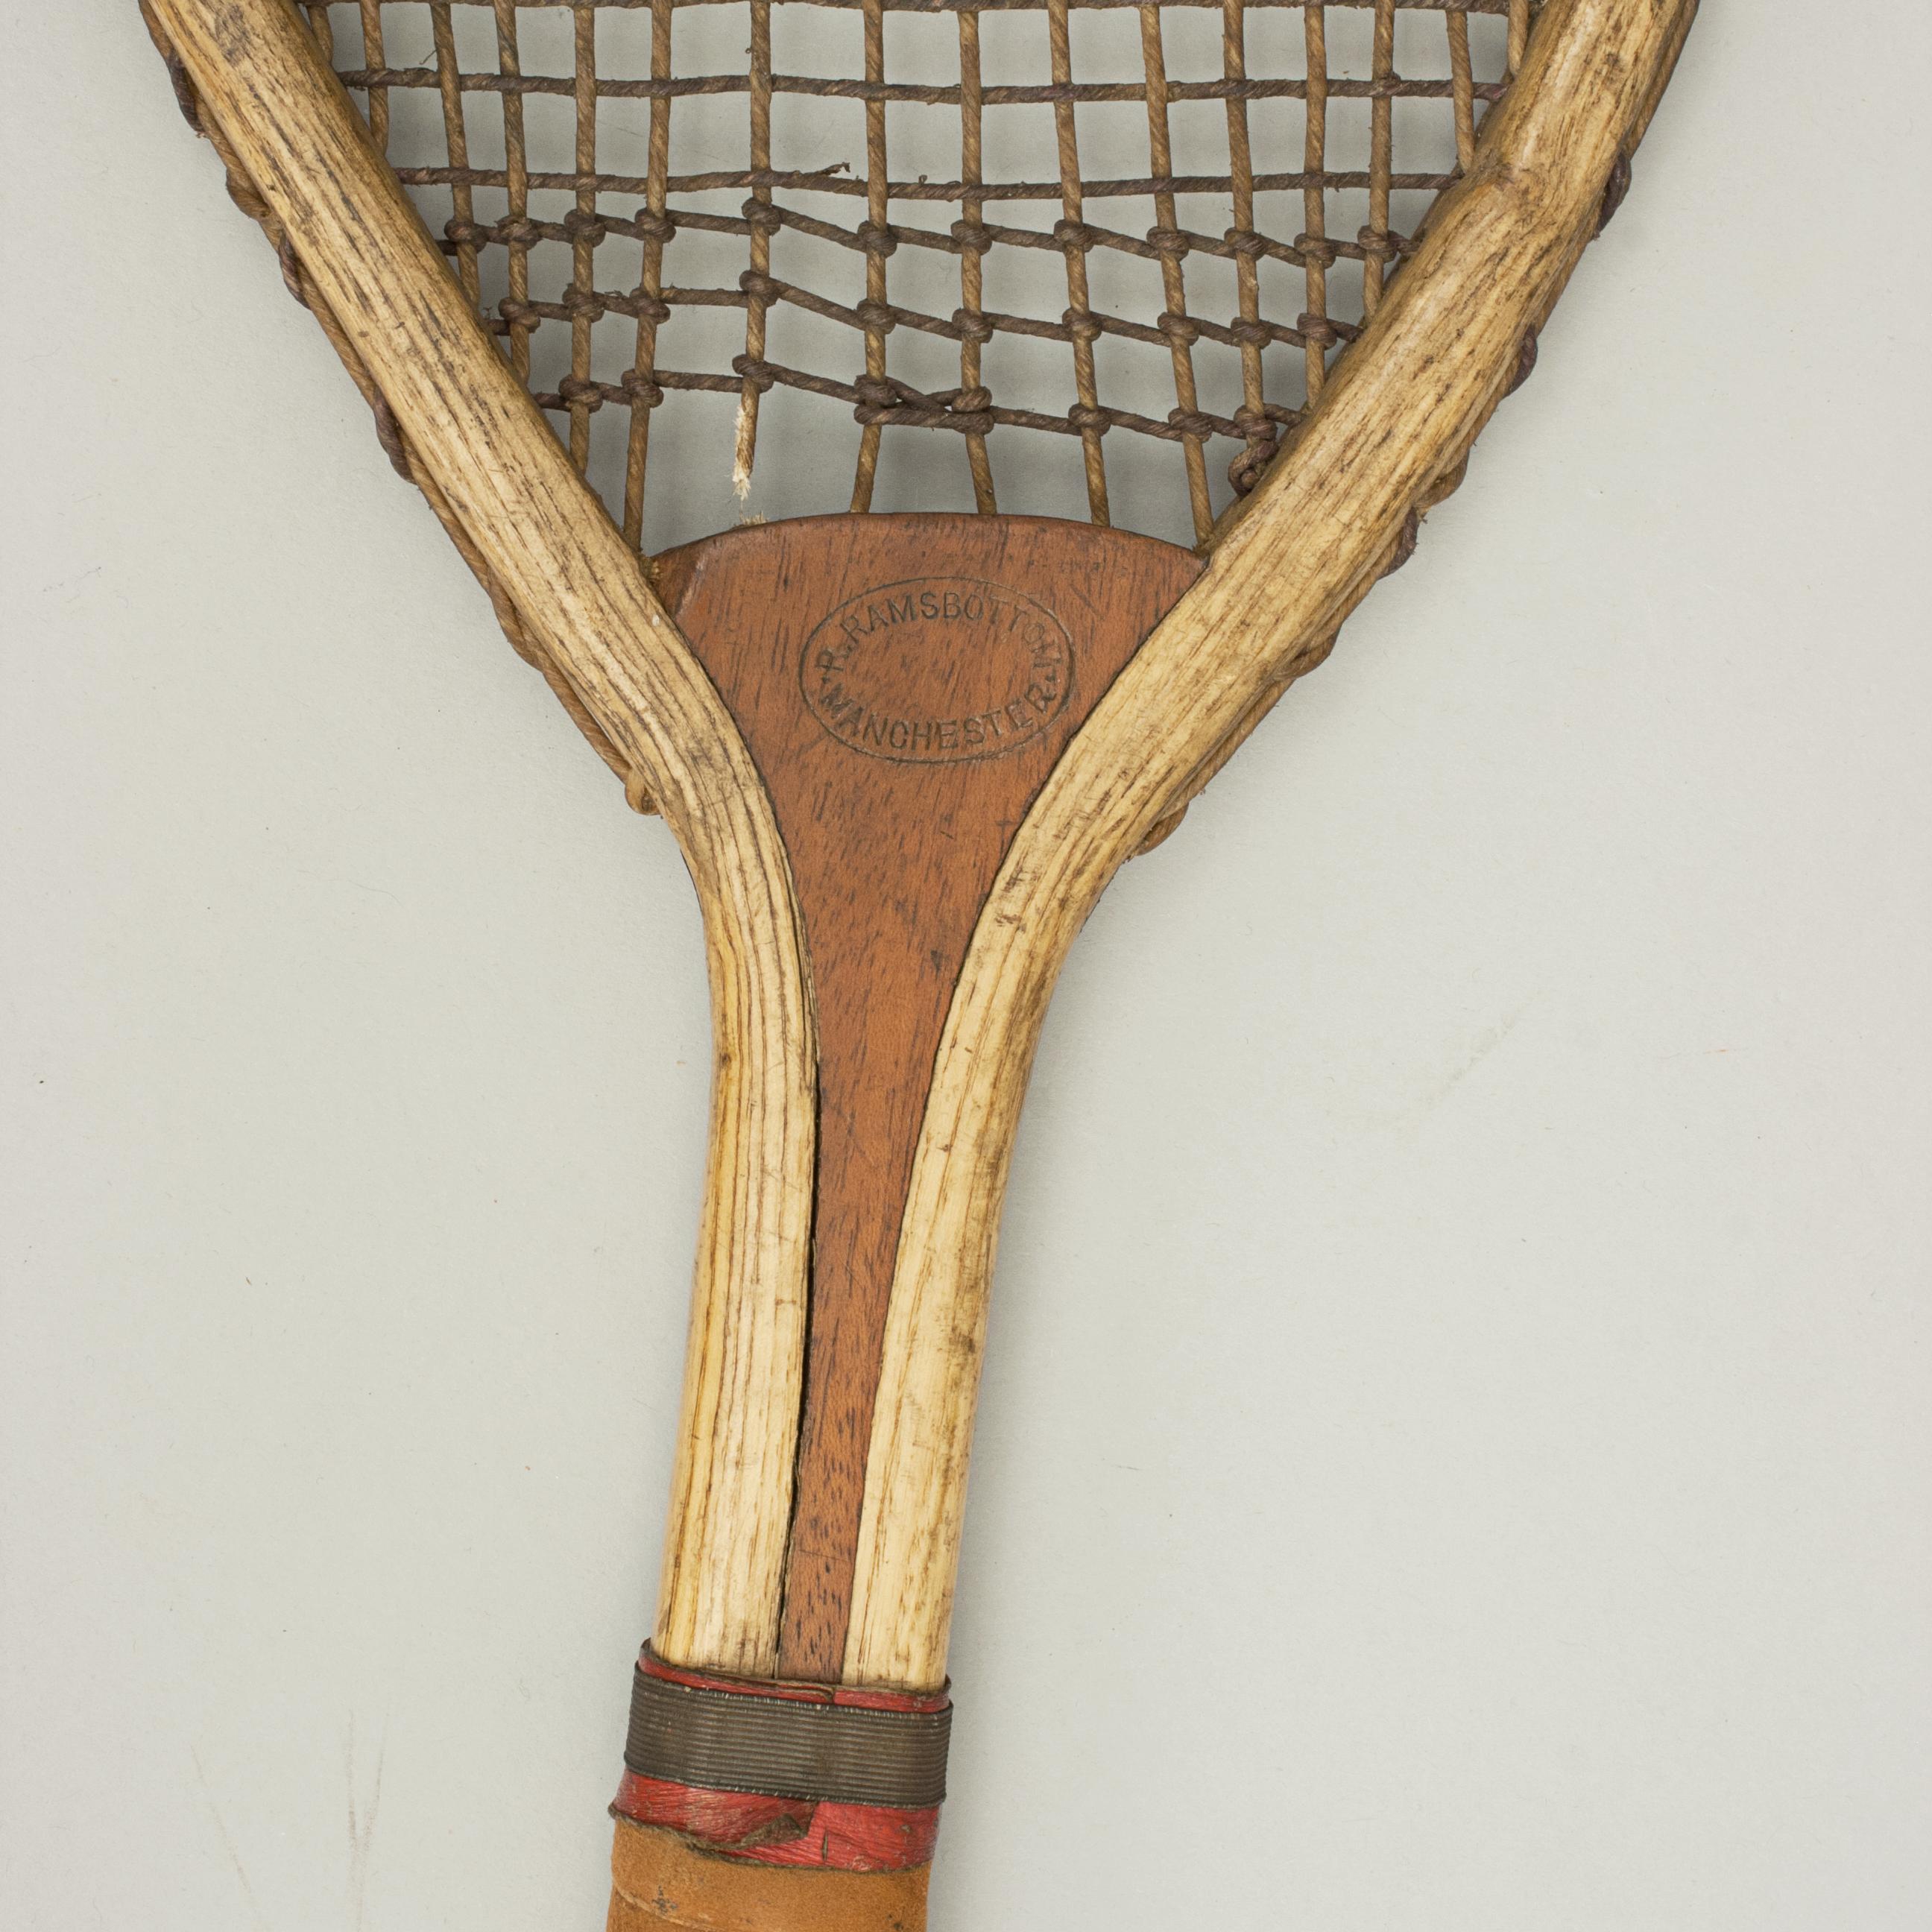 Late 19th Century Feltham Lawn Tennis Racket, Lop Sided, Tear Drop Shape, Antique and Very Rare